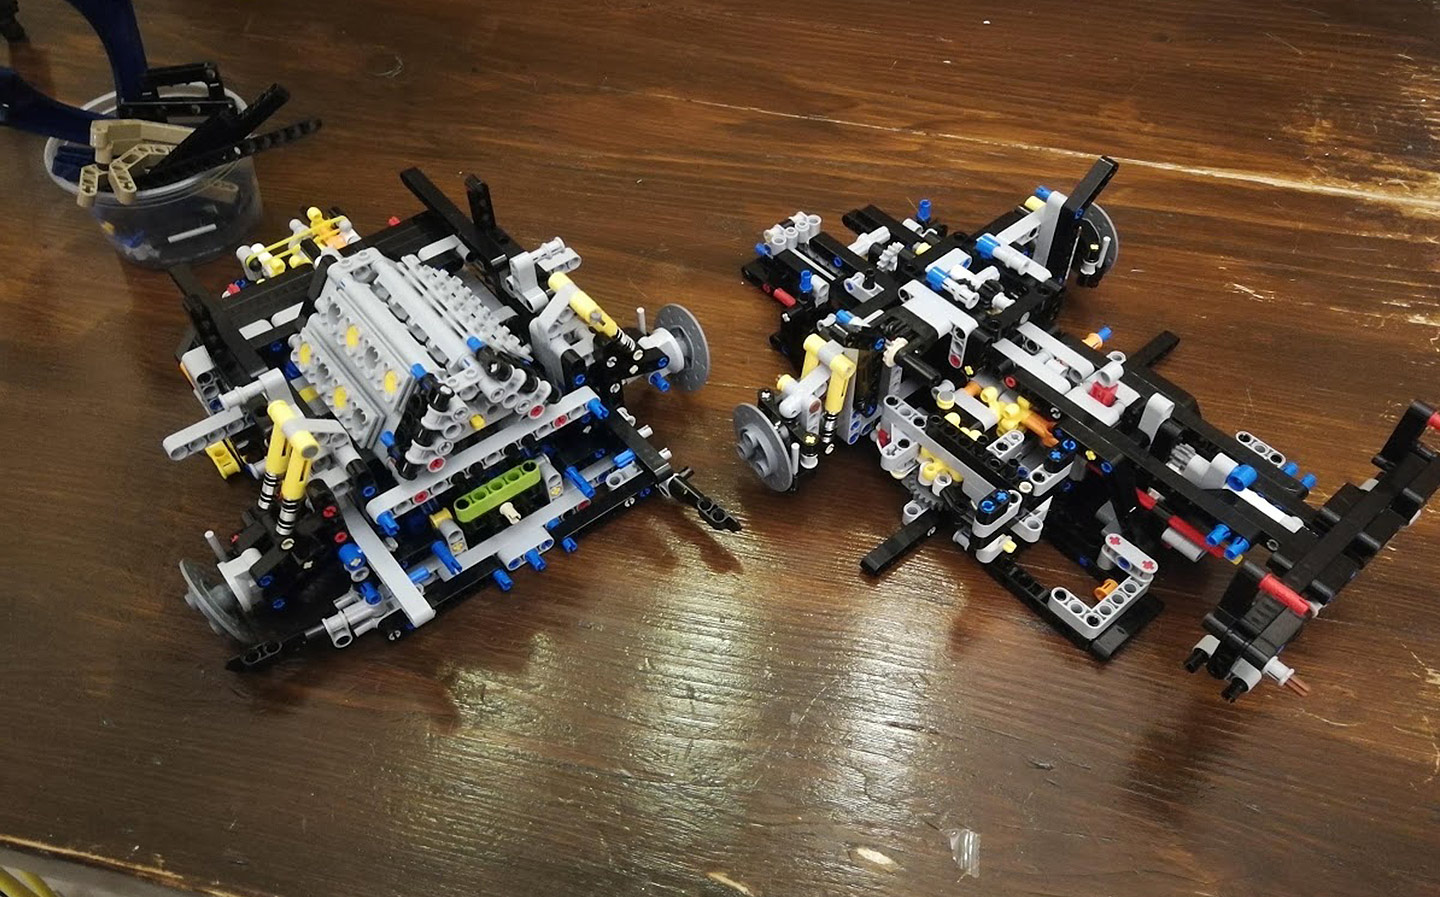 This is what it's like to build the LEGO Technic Bugatti model